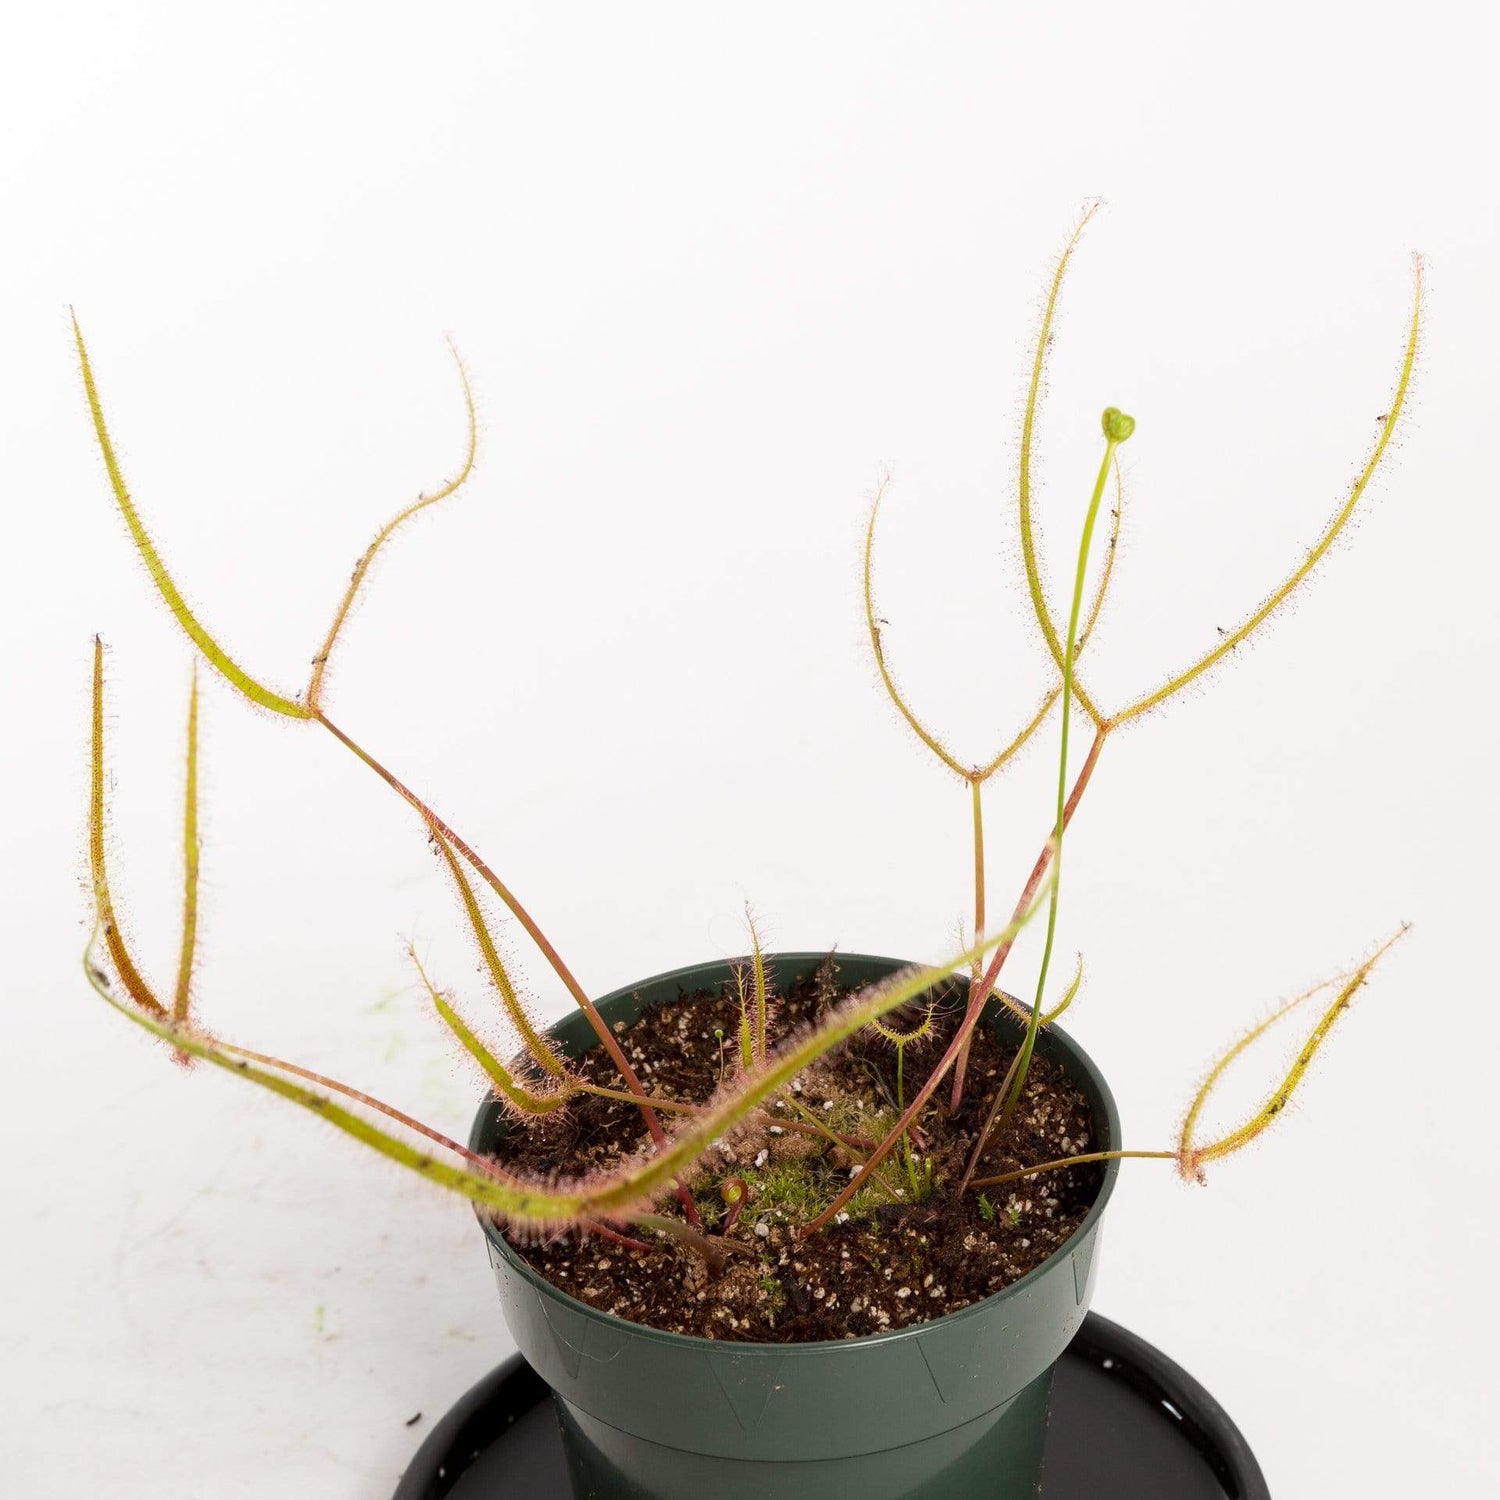 Urban Sprouts Plant Carnivorous 'Fork-leaved Sundew - Dichotoma'